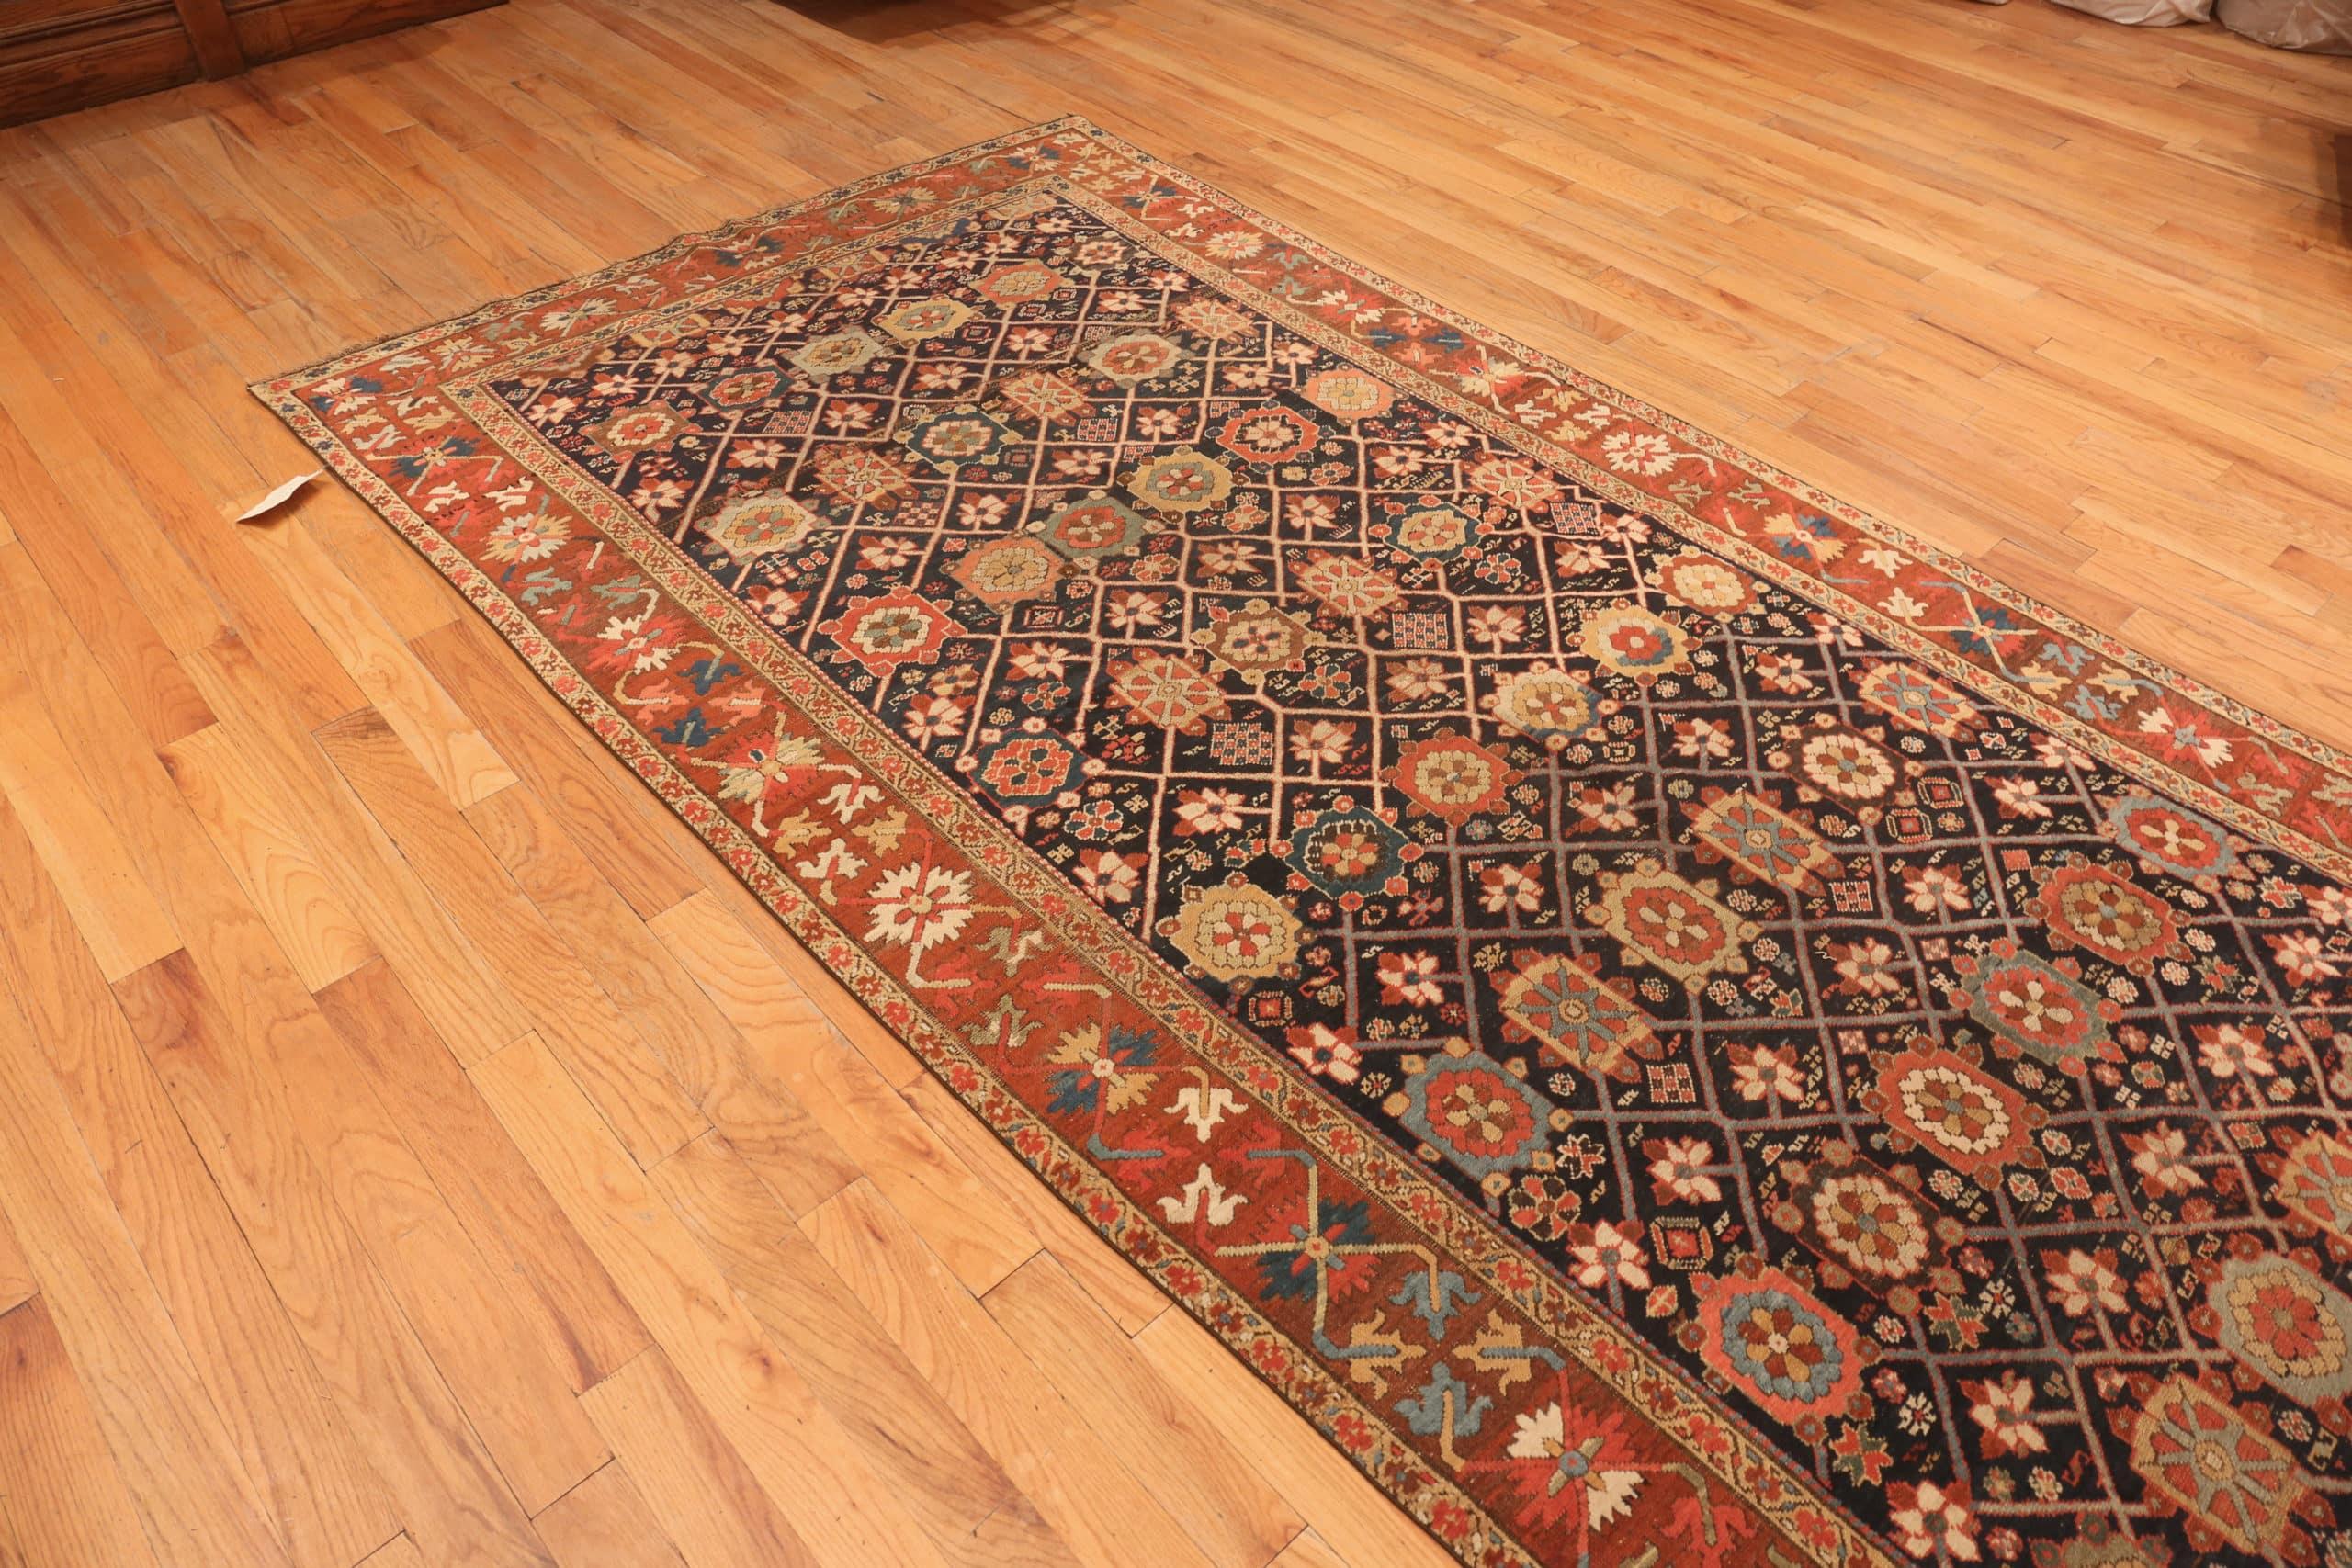 Tribal Antique Northwest Persian Rug, Country of Origin / Rug Type: Persian Rugs, Circa Date: 1880 – Size: 5 ft 5 in x 14 ft (1.65 m x 4.27 m)

This Northwest Persian rug is unique because of its angular forms and vibrant colors, reminiscent of